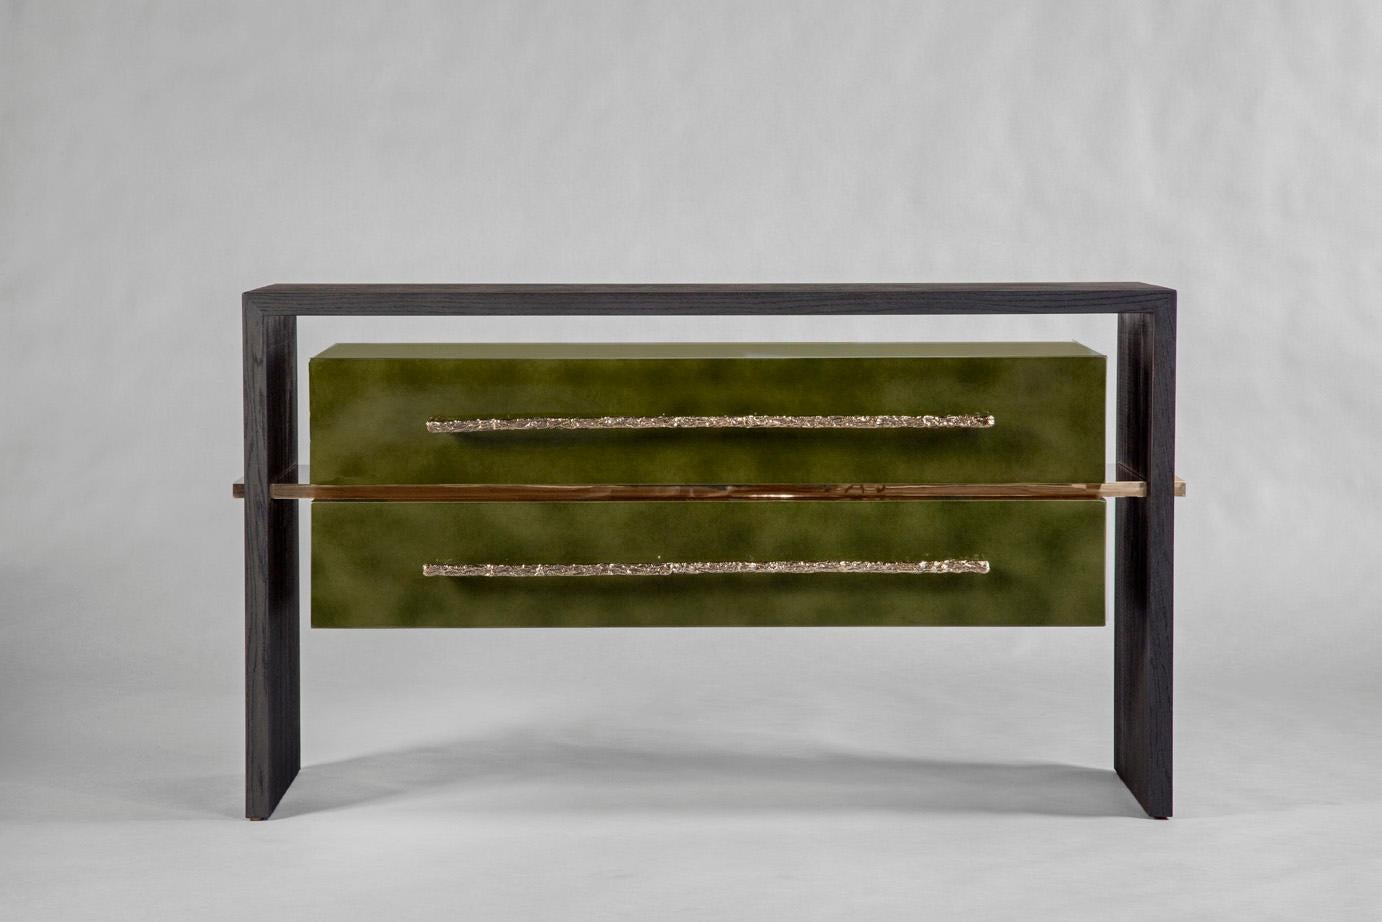 Sand-blasted oak in a matte bark finish. A central polished bronze stretcher holds the two-drawer cabinet finished in a dark green “Beka” lacquer with two long polished bronze handles.
The insides of the drawers are lined with felt. 
Custom sizes,